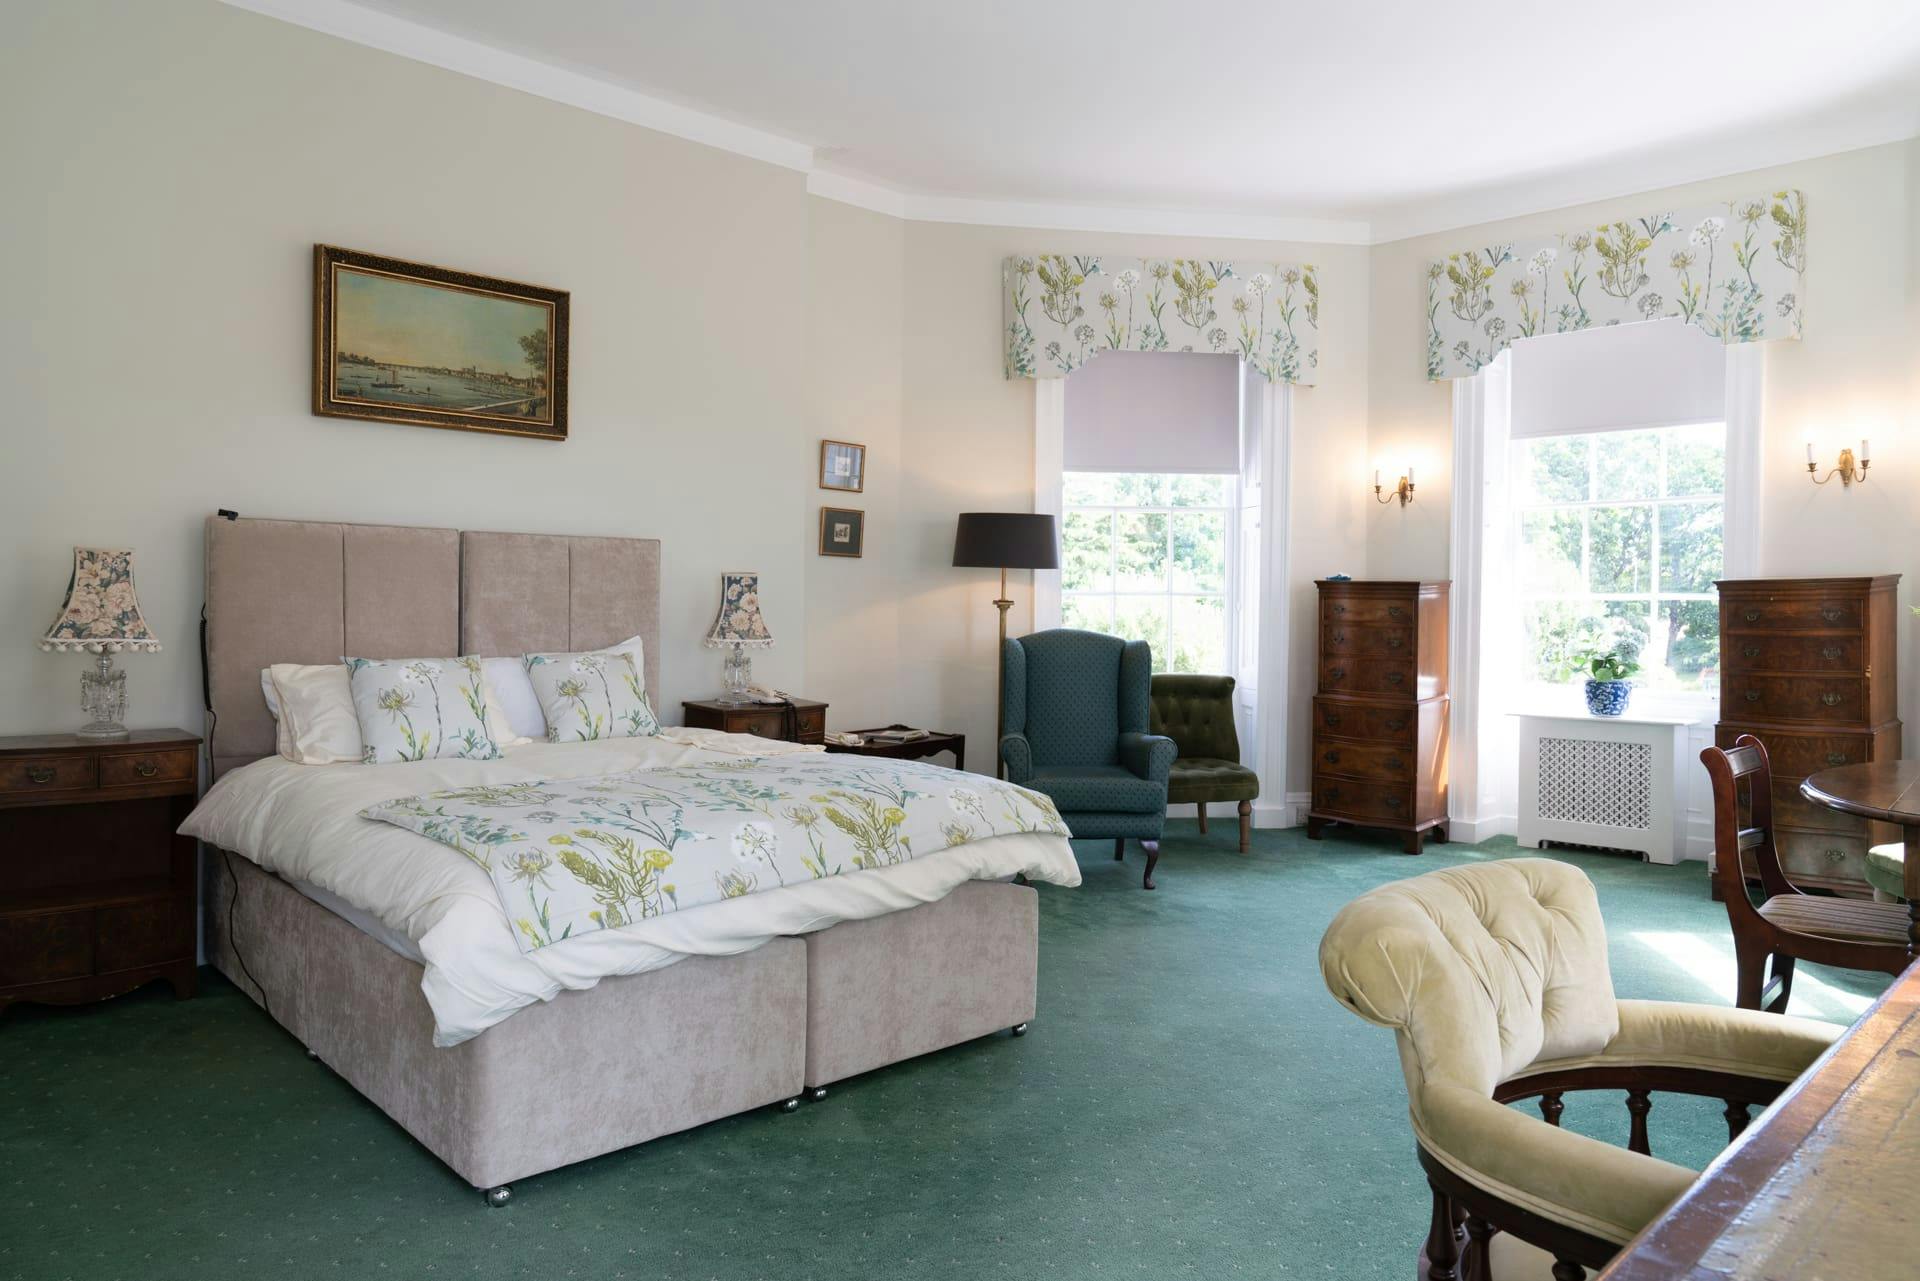 Bedroom at Nyton House Residential Care Home, Chichester, West Sussex